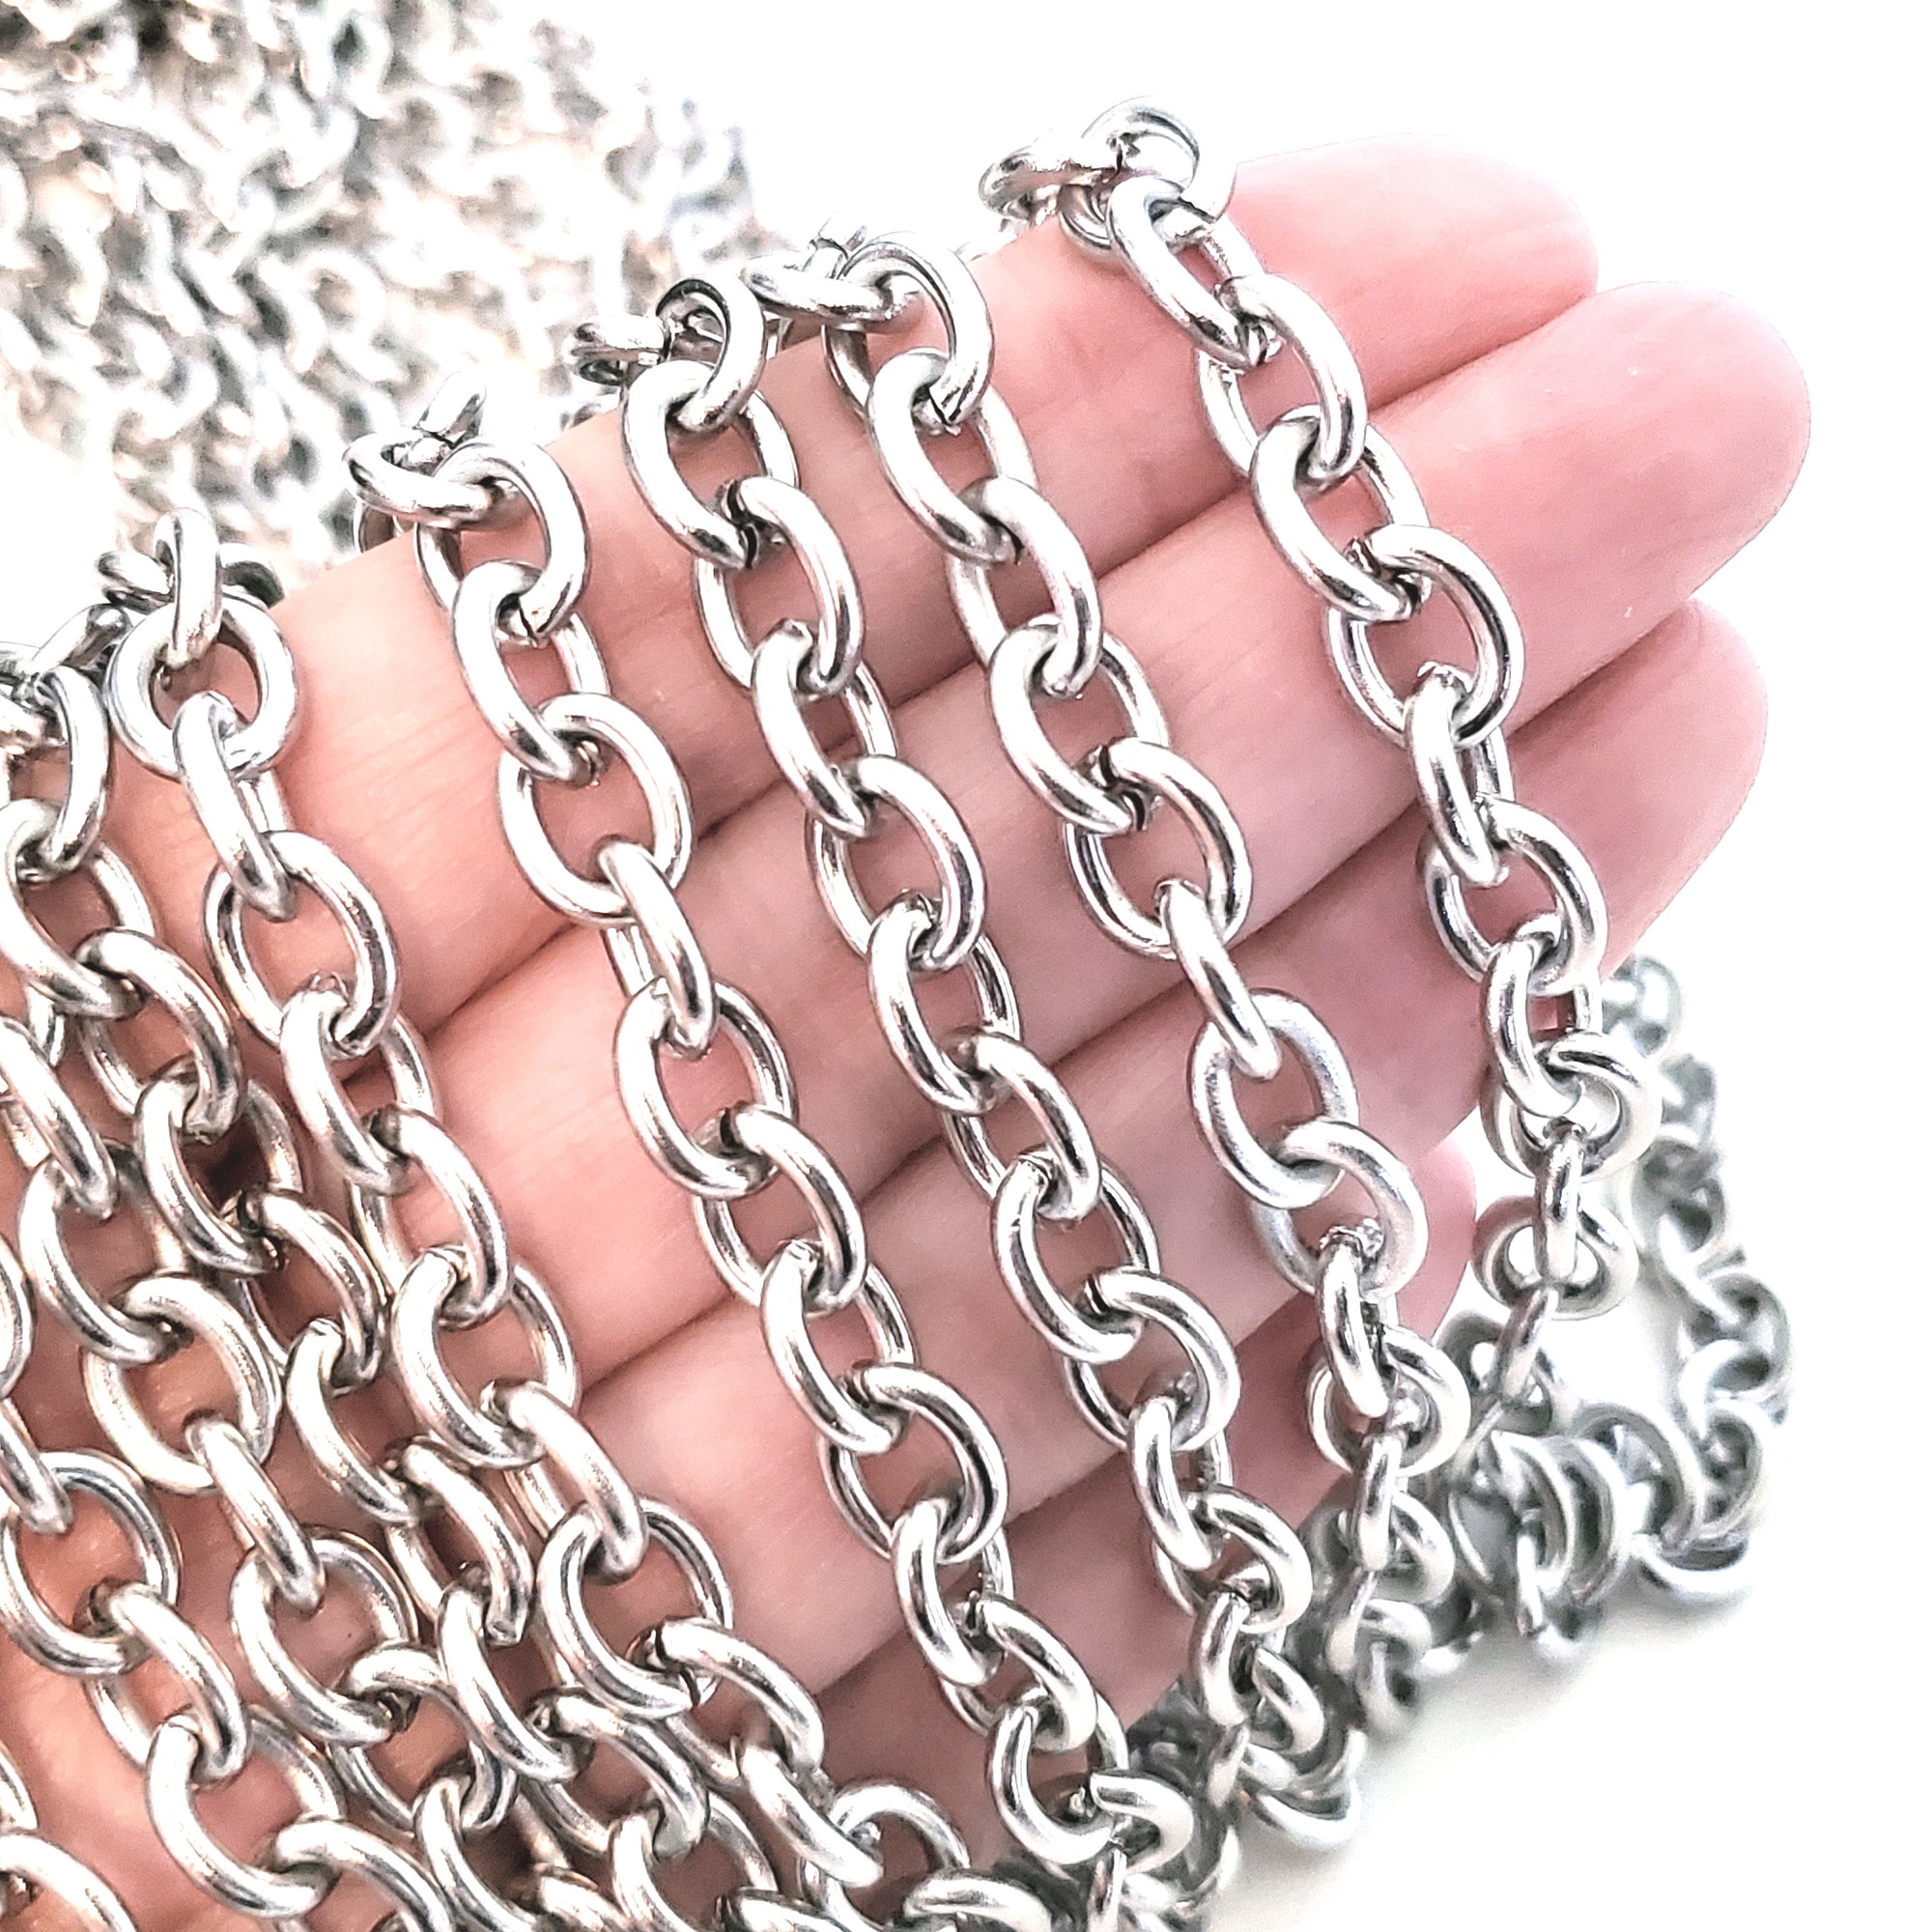 Handbag Chain, Chain Sold By The Foot